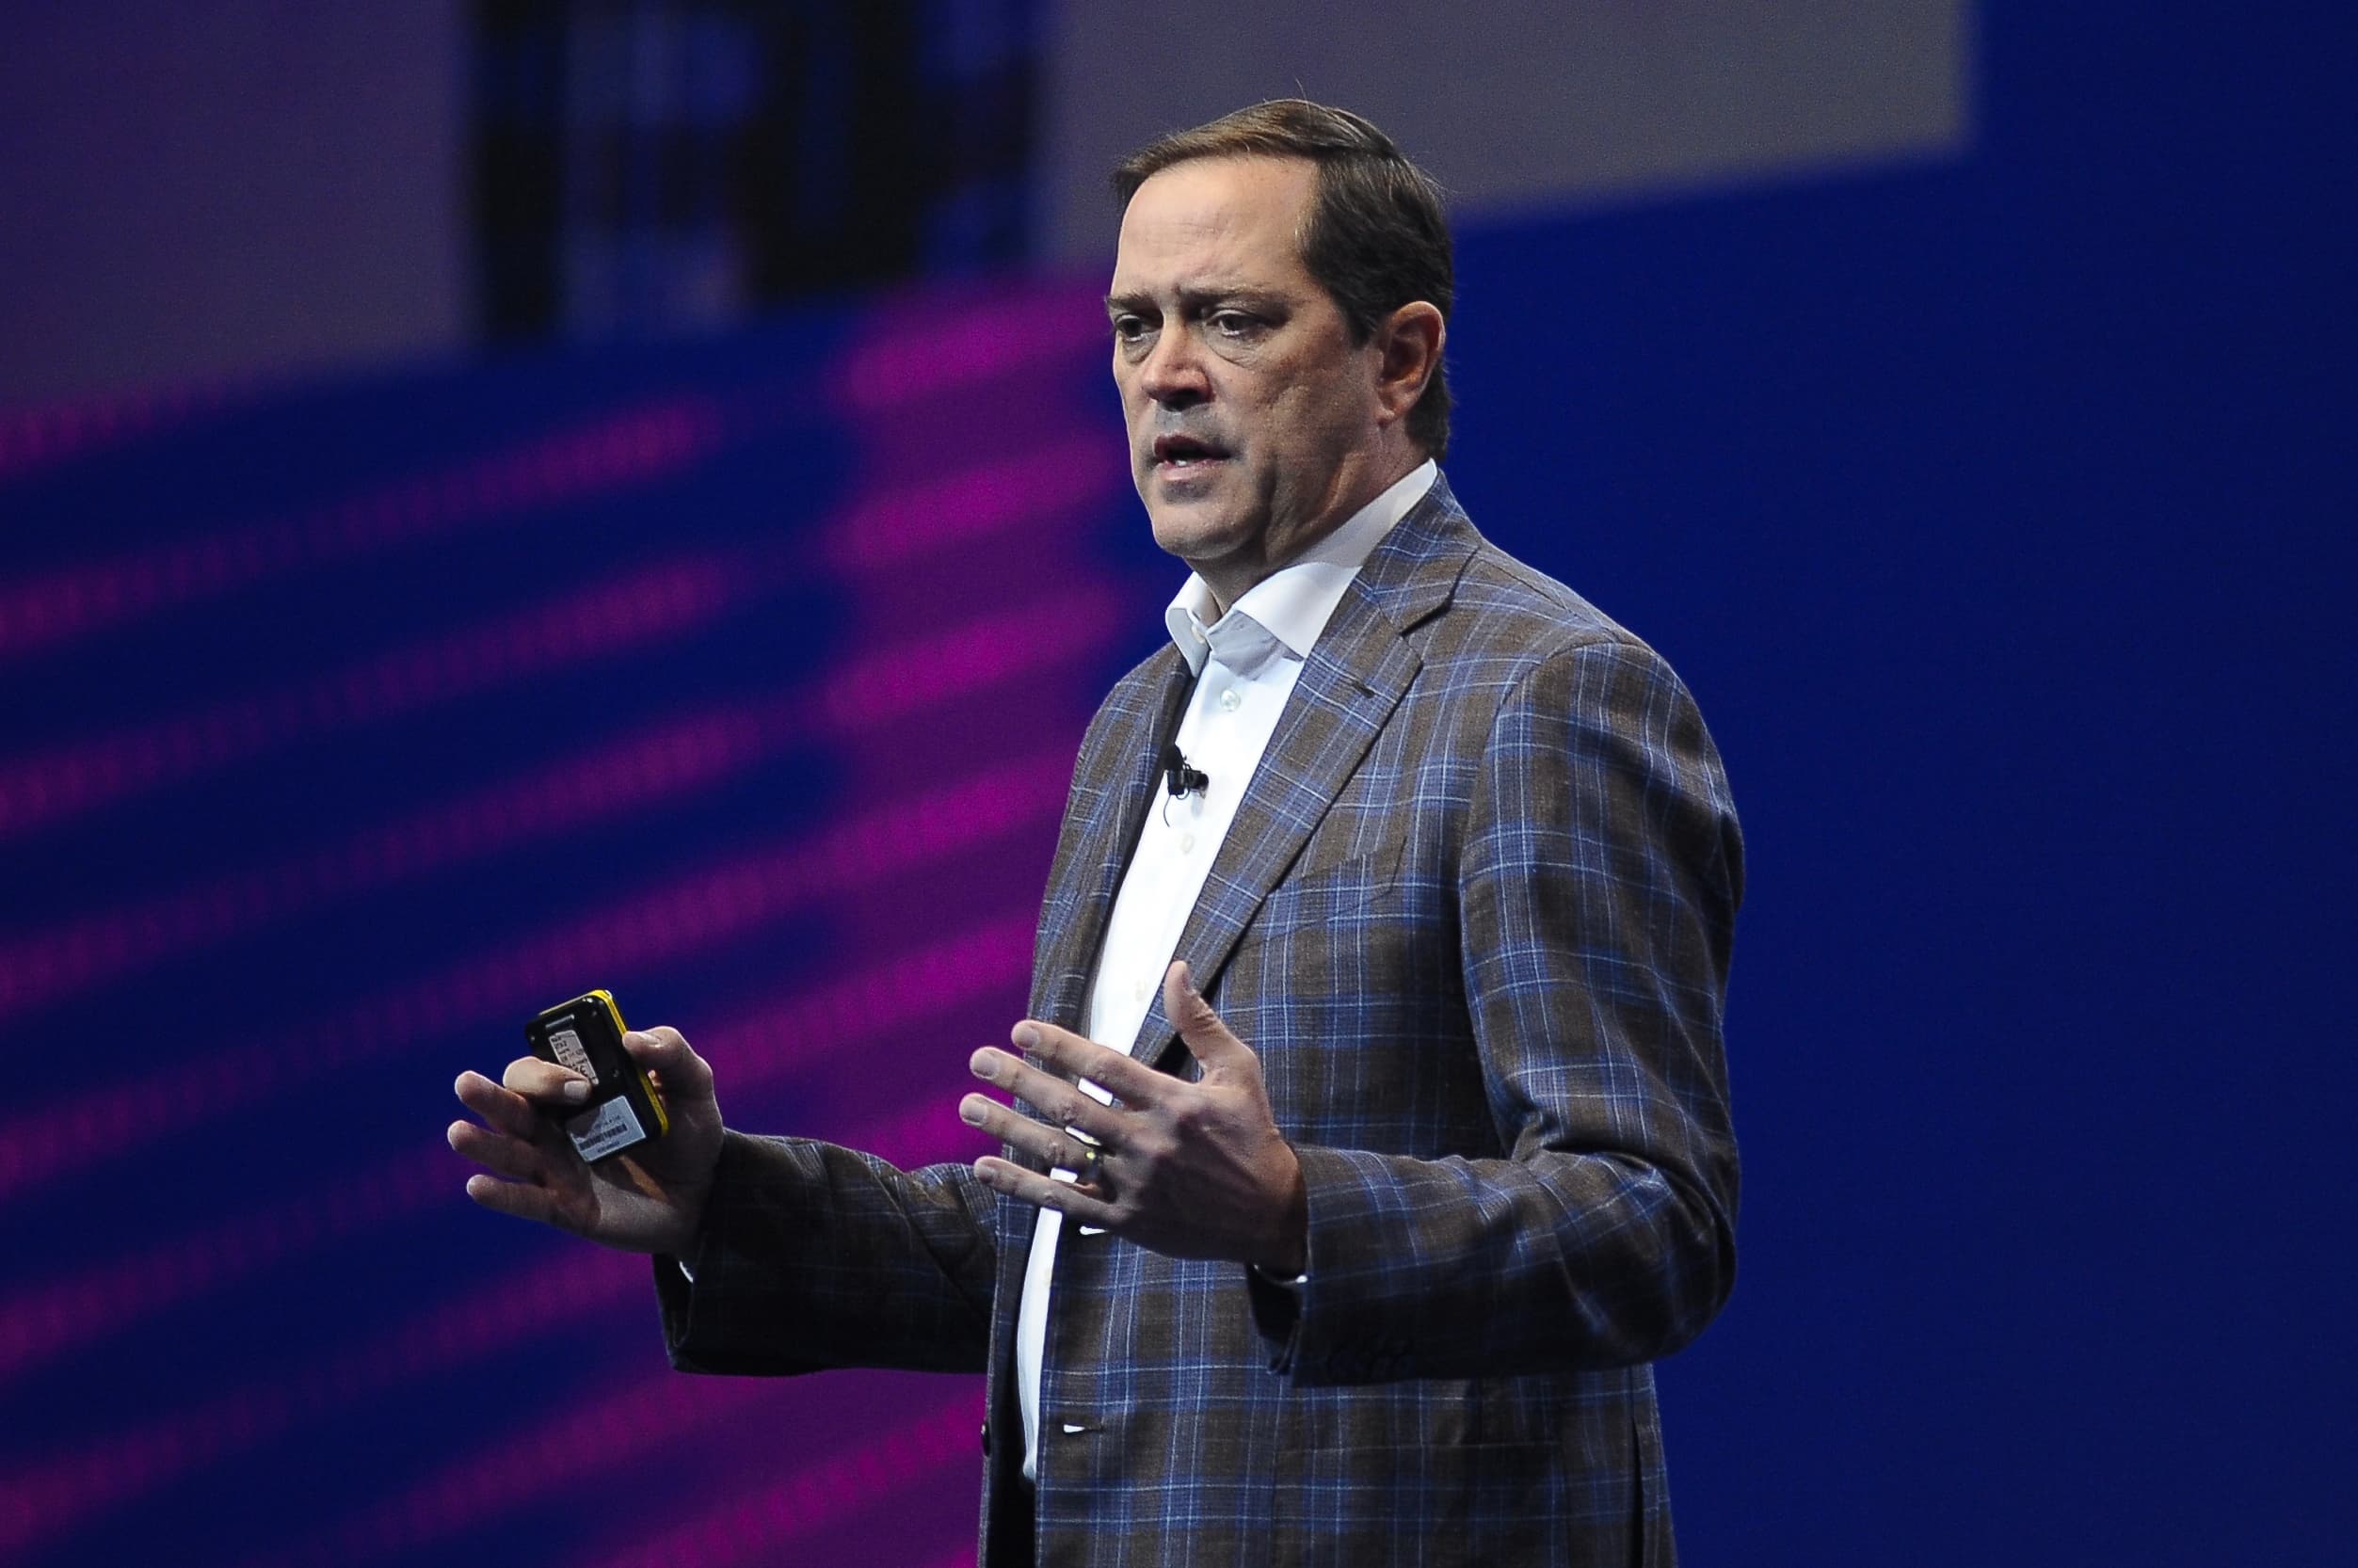 Cisco's CEO defends the Club holding’s future growth prospects. Investors want more proof